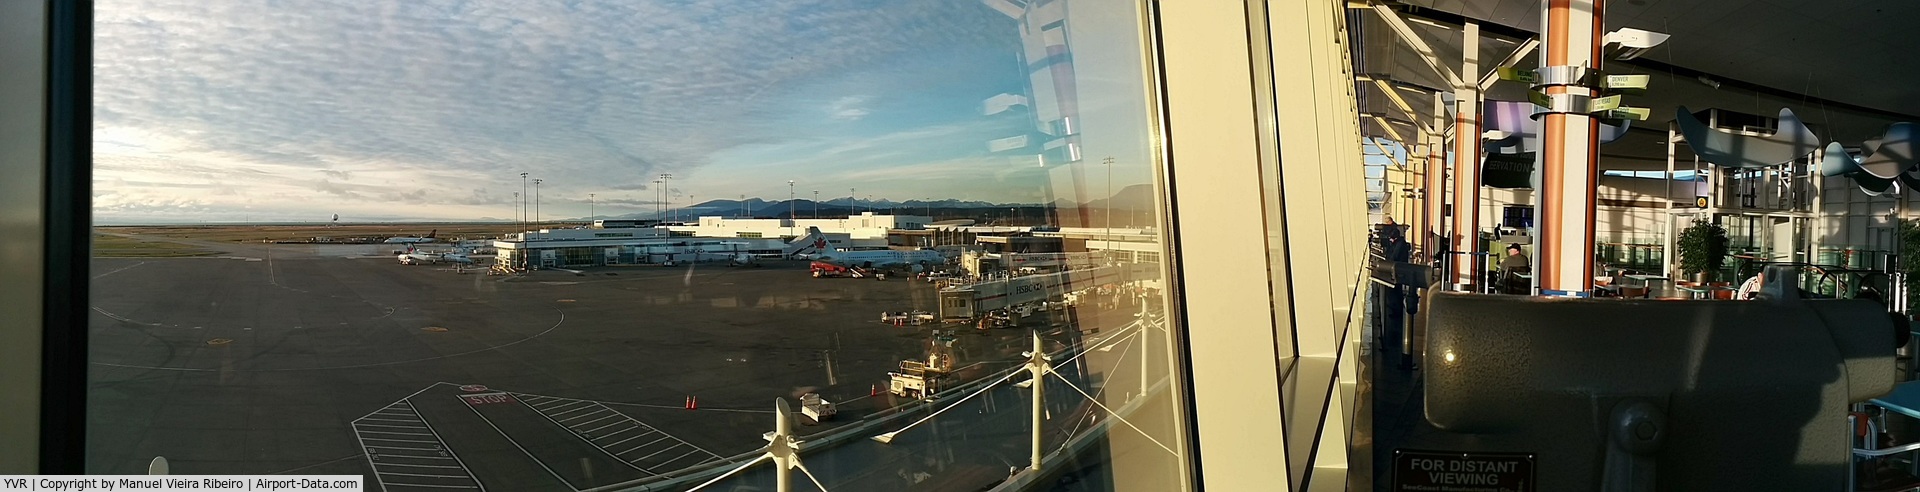 Vancouver International Airport, Vancouver, British Columbia Canada (YVR) - View from the Observation Deck